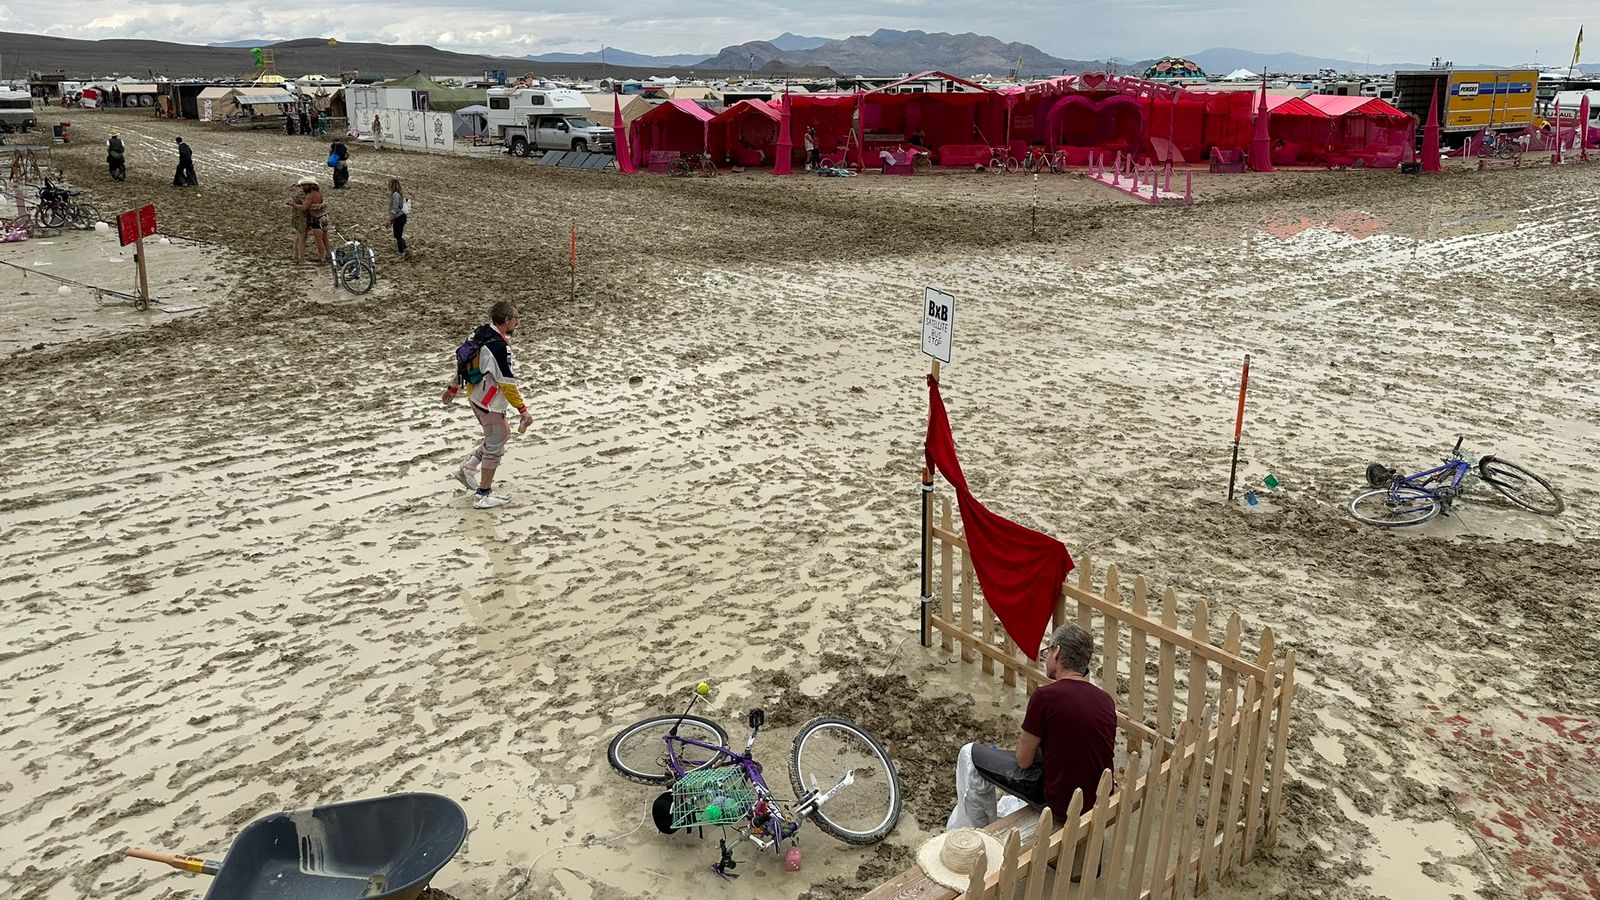 Urgent: Burning Man Attendees Advised for Shelter and Food Conservation